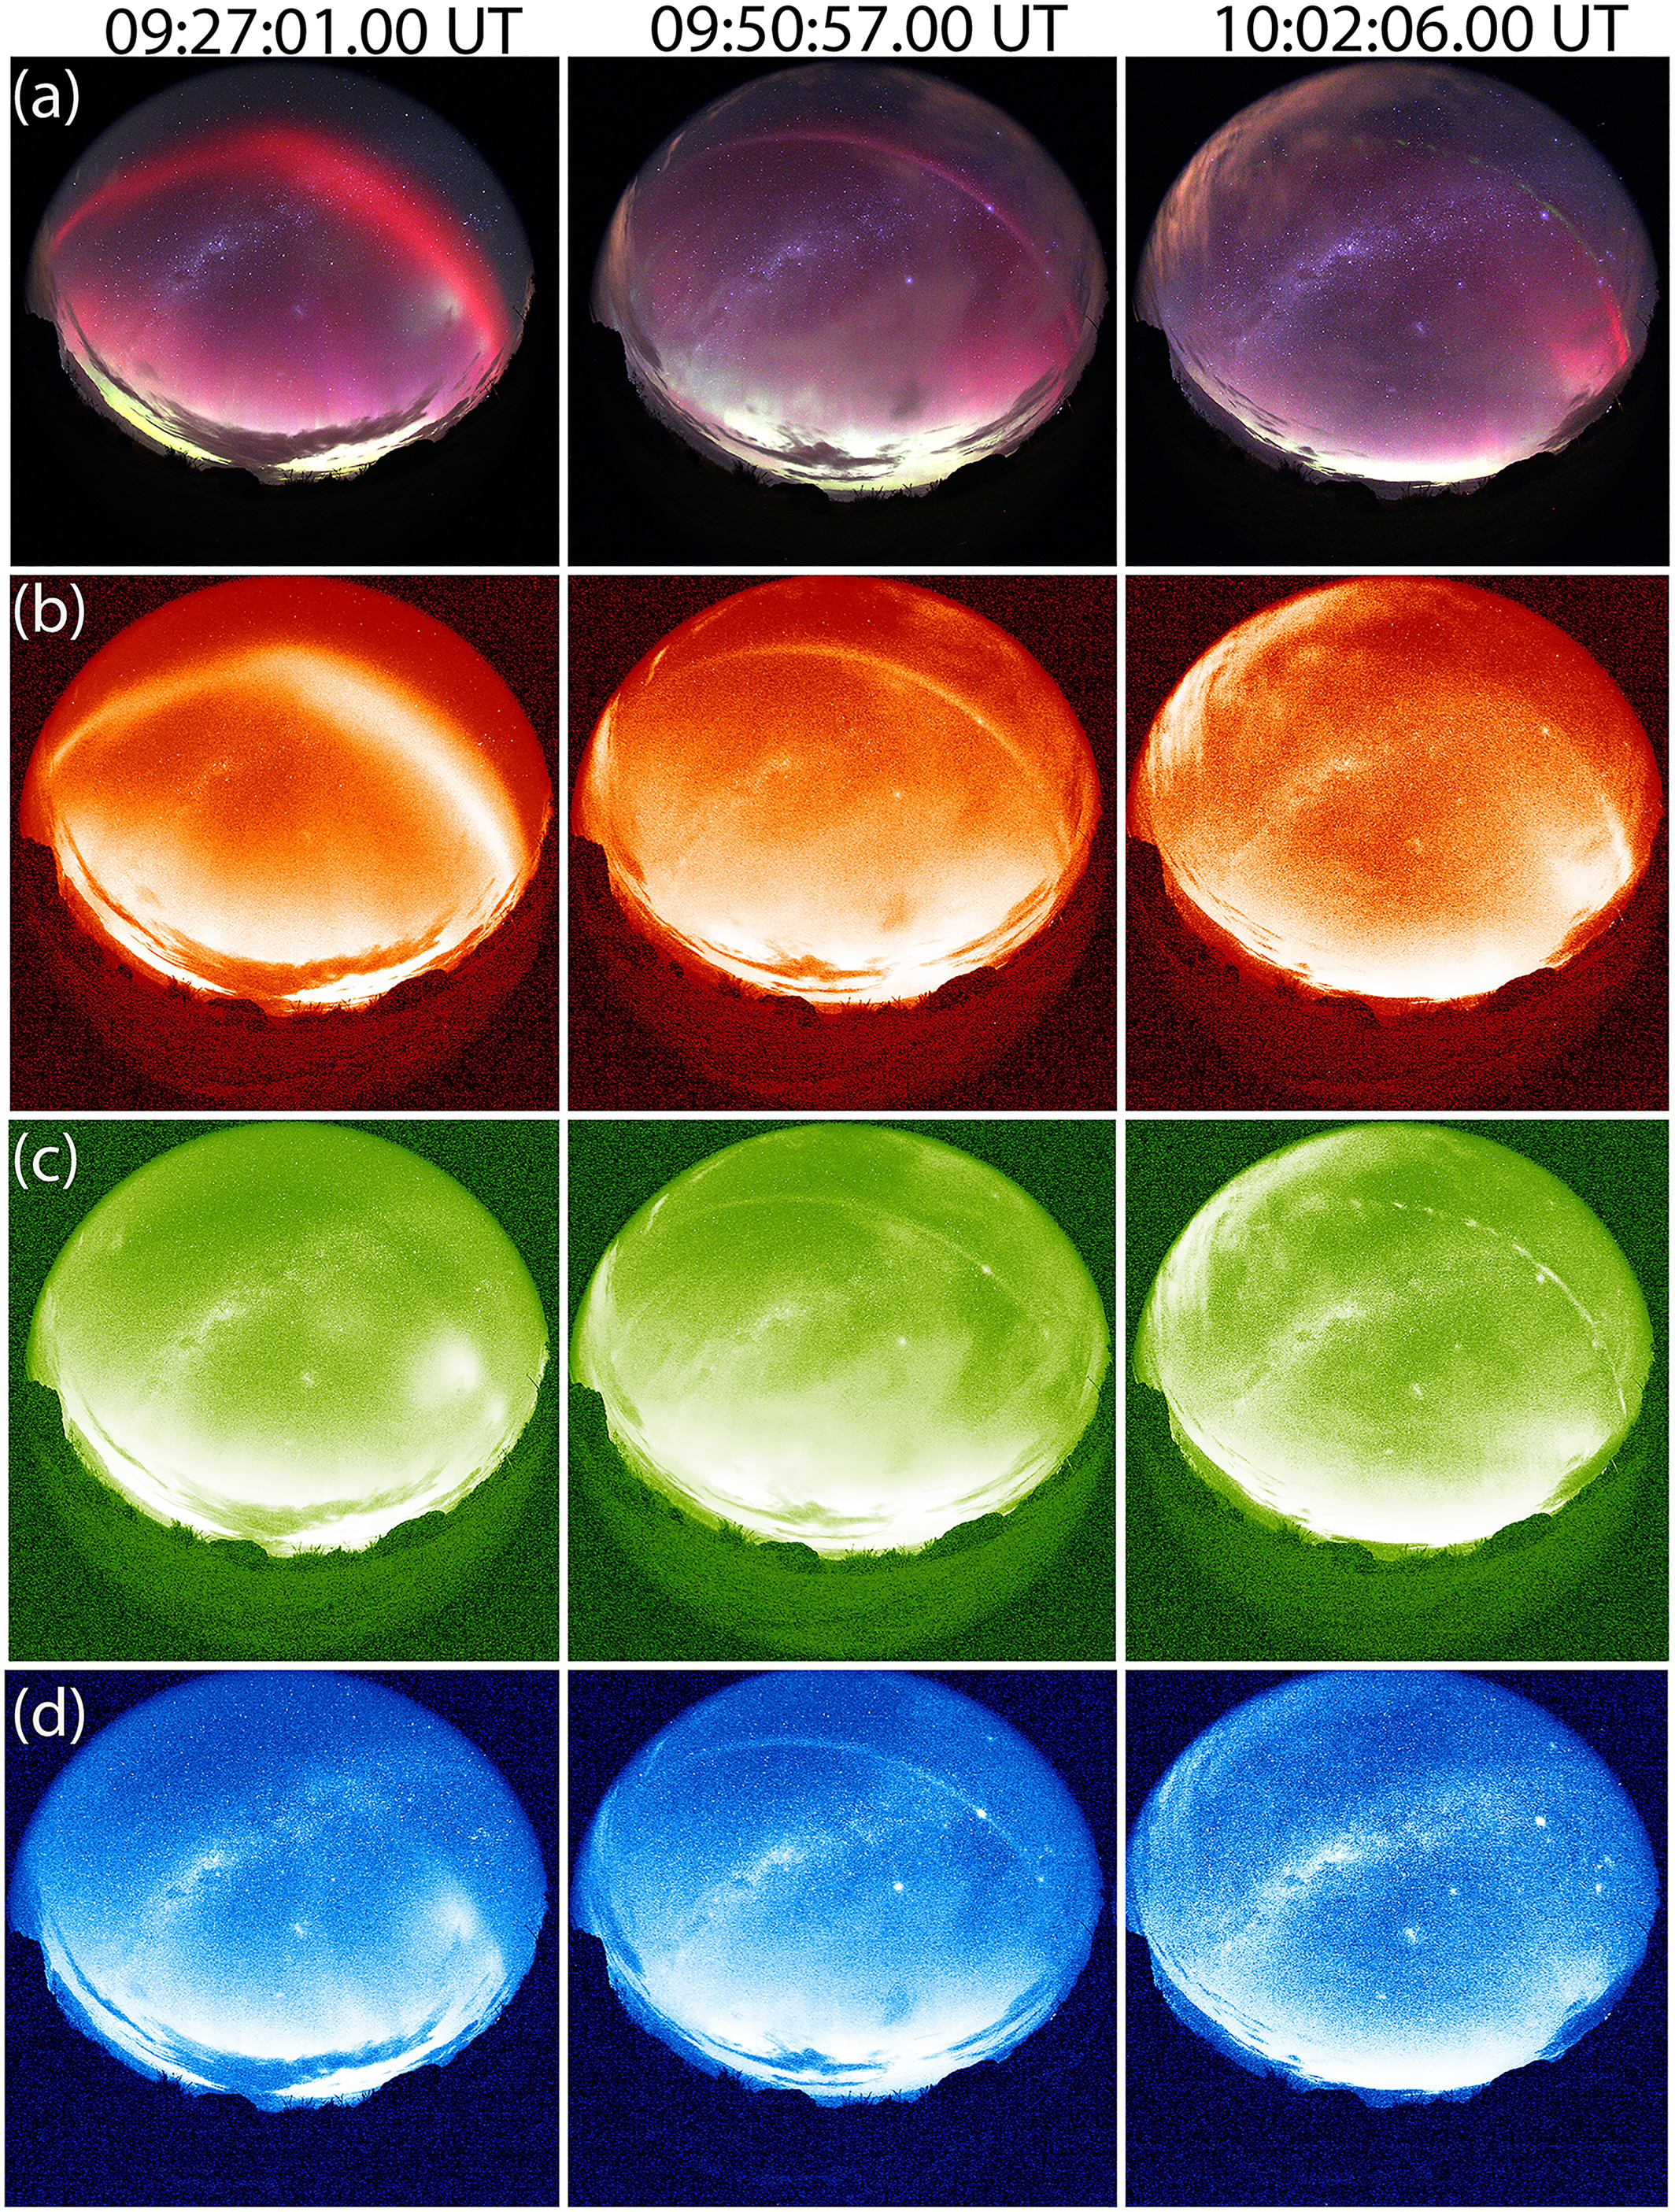 The full set of auroral images, showing auroral objects through a range of color filters.